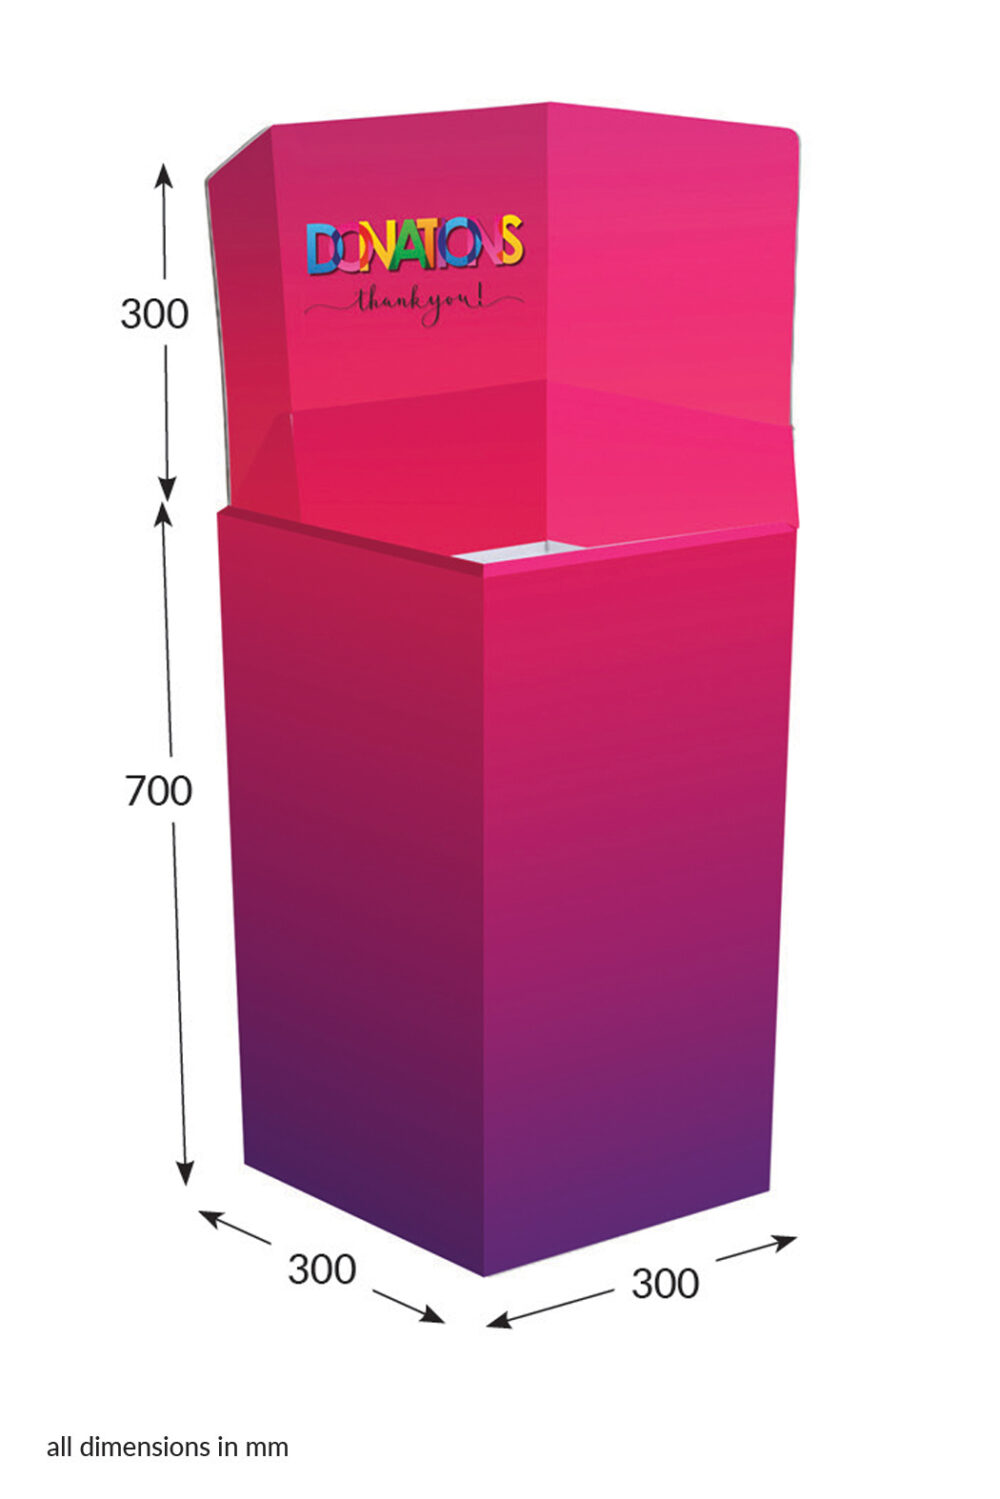 Featured image for “Large Hexagonal Dump Bin - Donations (Pink)”